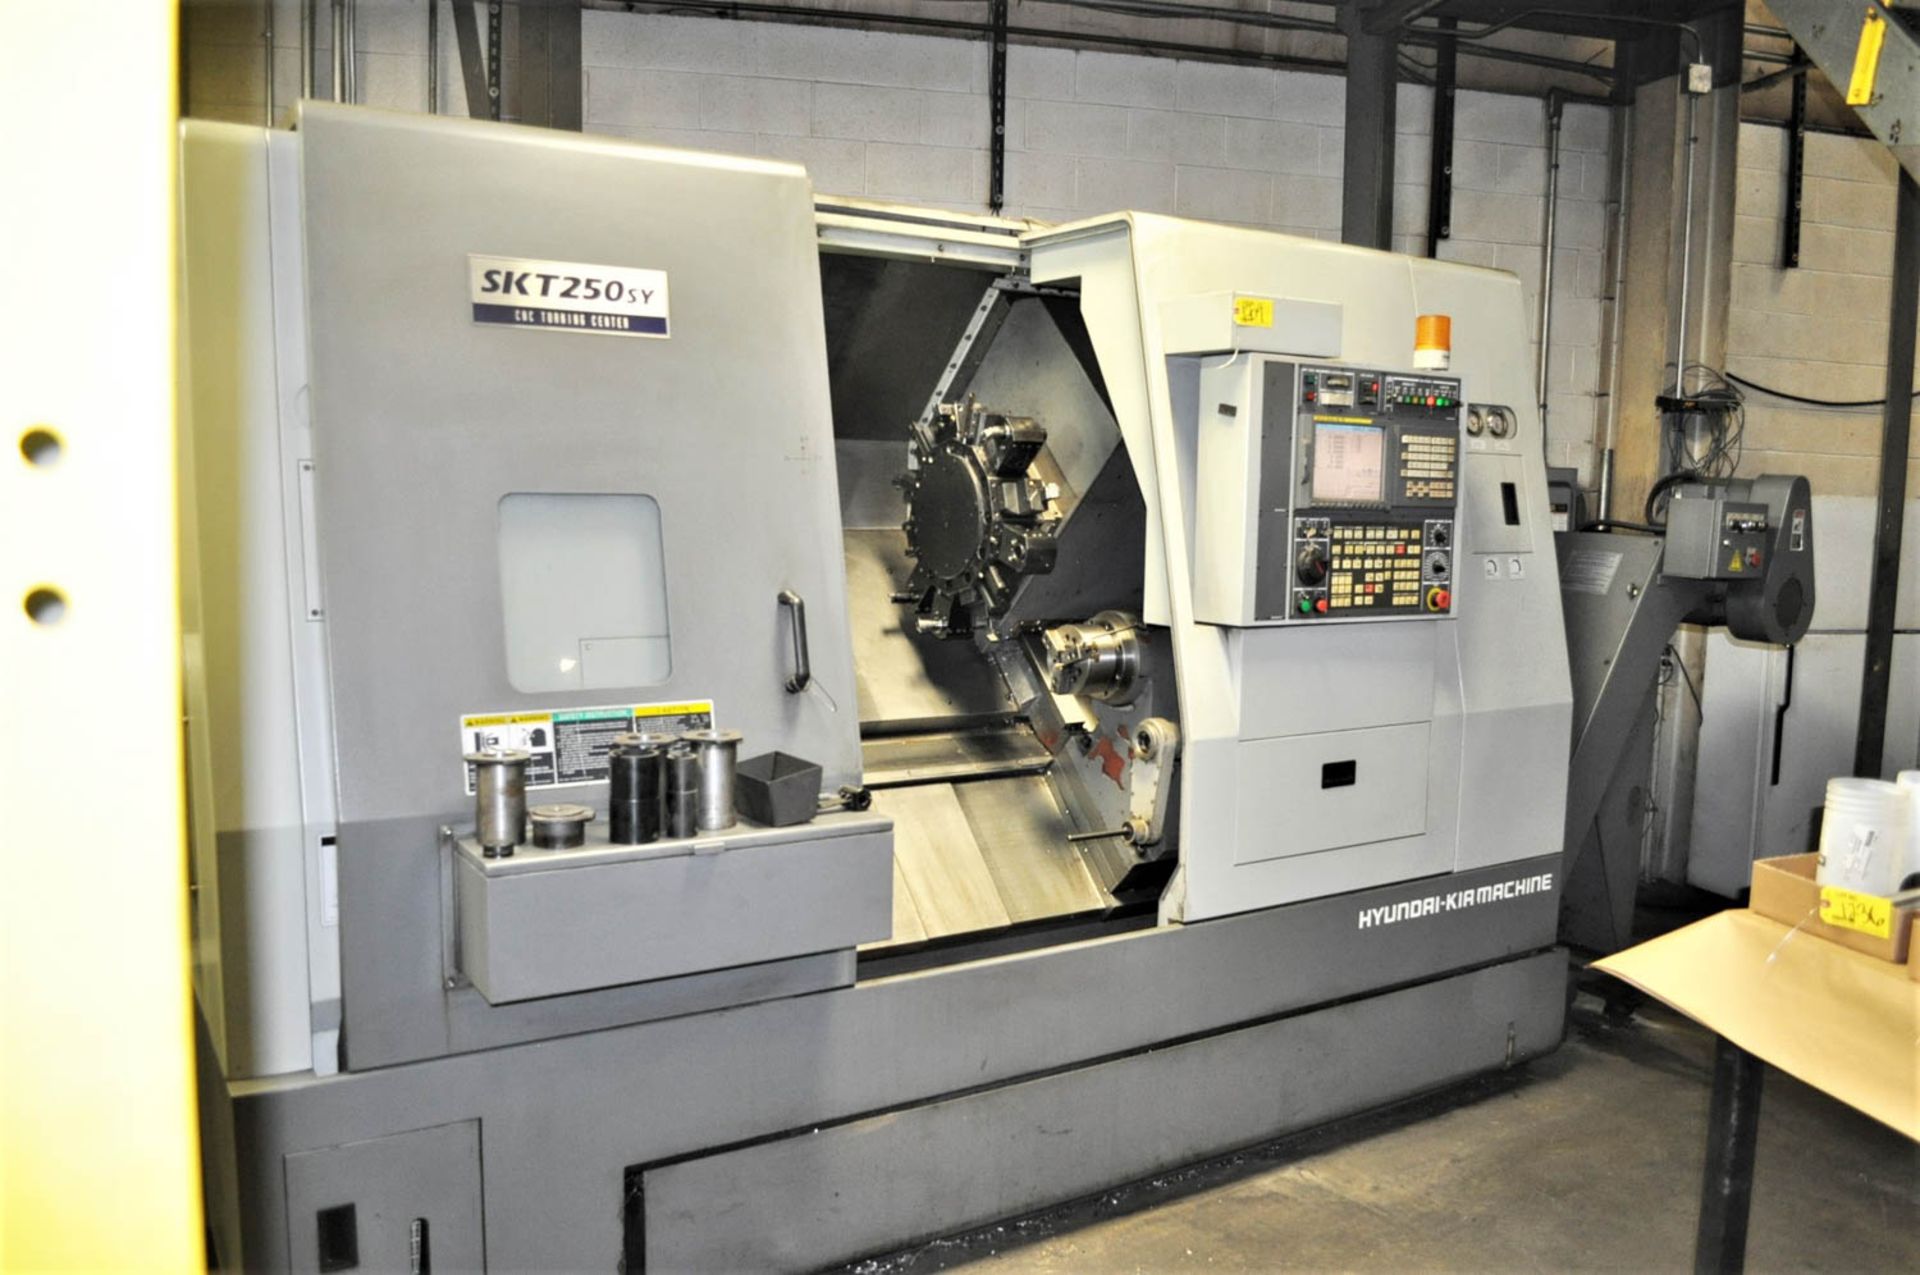 HYUNDAI KIA MDL. SKT250SY CNC TURNING CENTER, WITH SUB-SPINDLE, C/Y AXIS, LIVE MILLING, FANUC